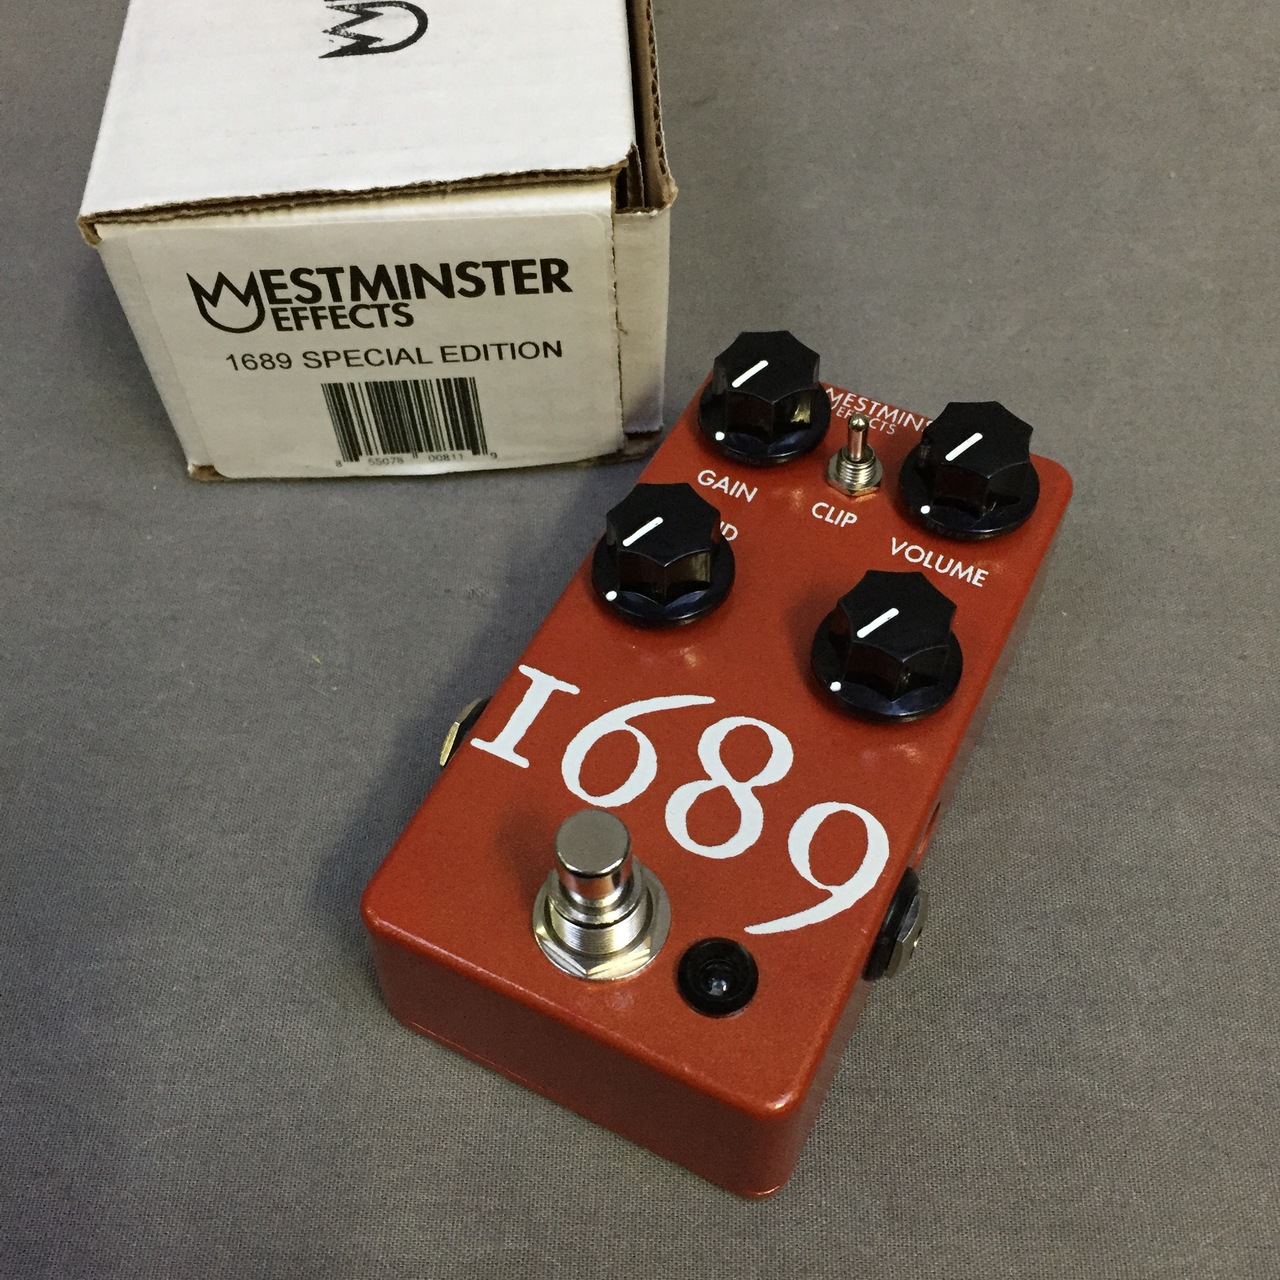 Westminster Effects 1689 V2 SPECIAL EDITION 買取りました